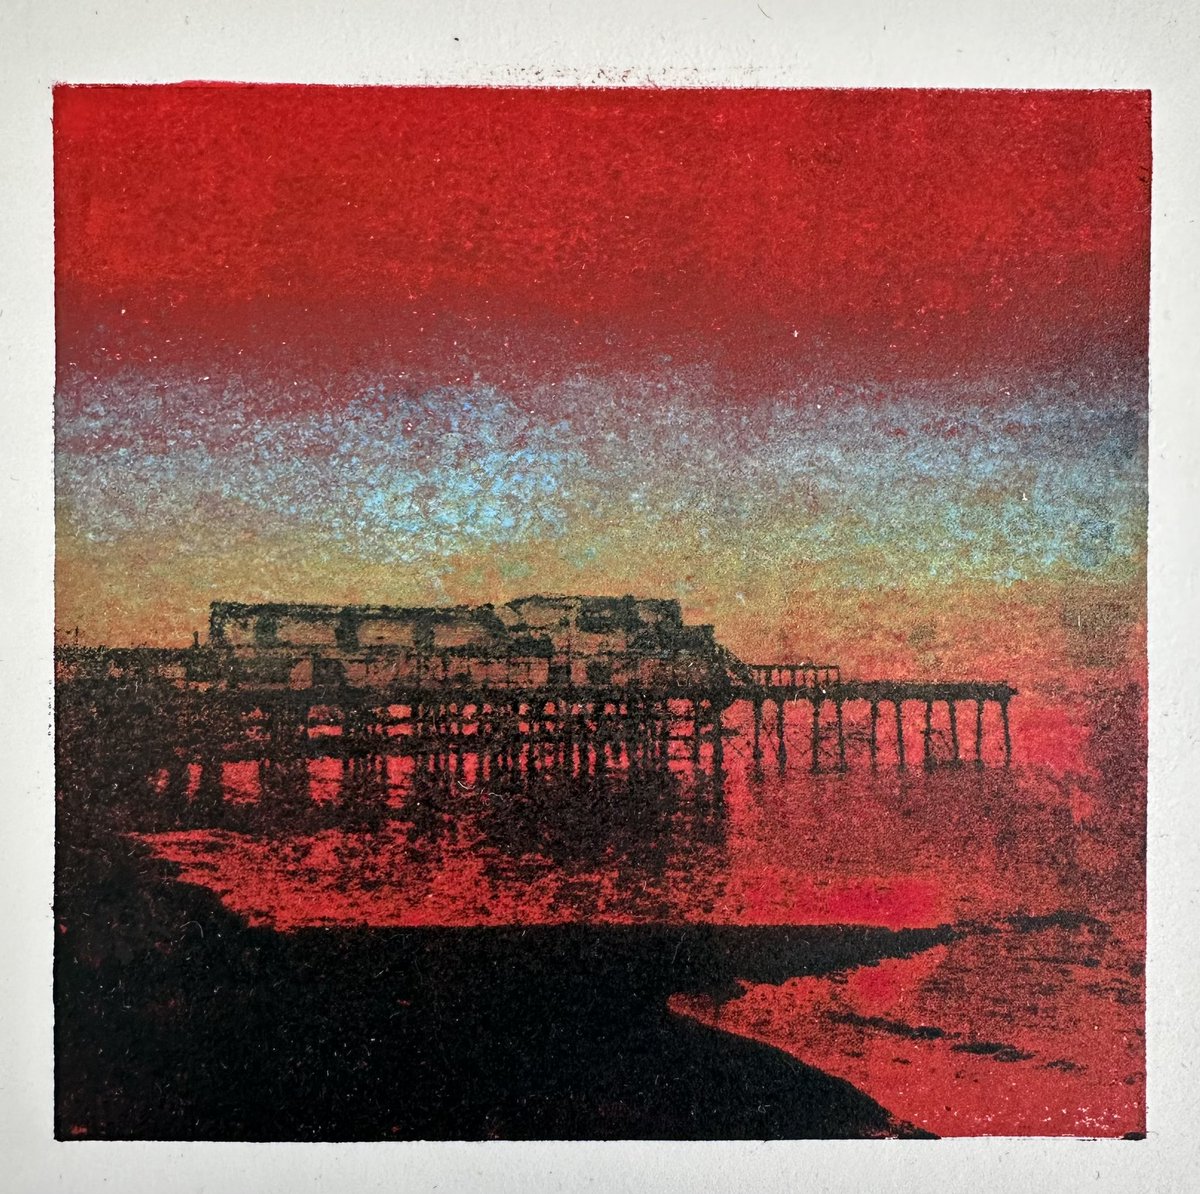 My entry this year for the @SBPrintmakers Miniprint Exhibition is ‘A Small Voice’ #miniprint #southbankprintmakers #aberystwyth